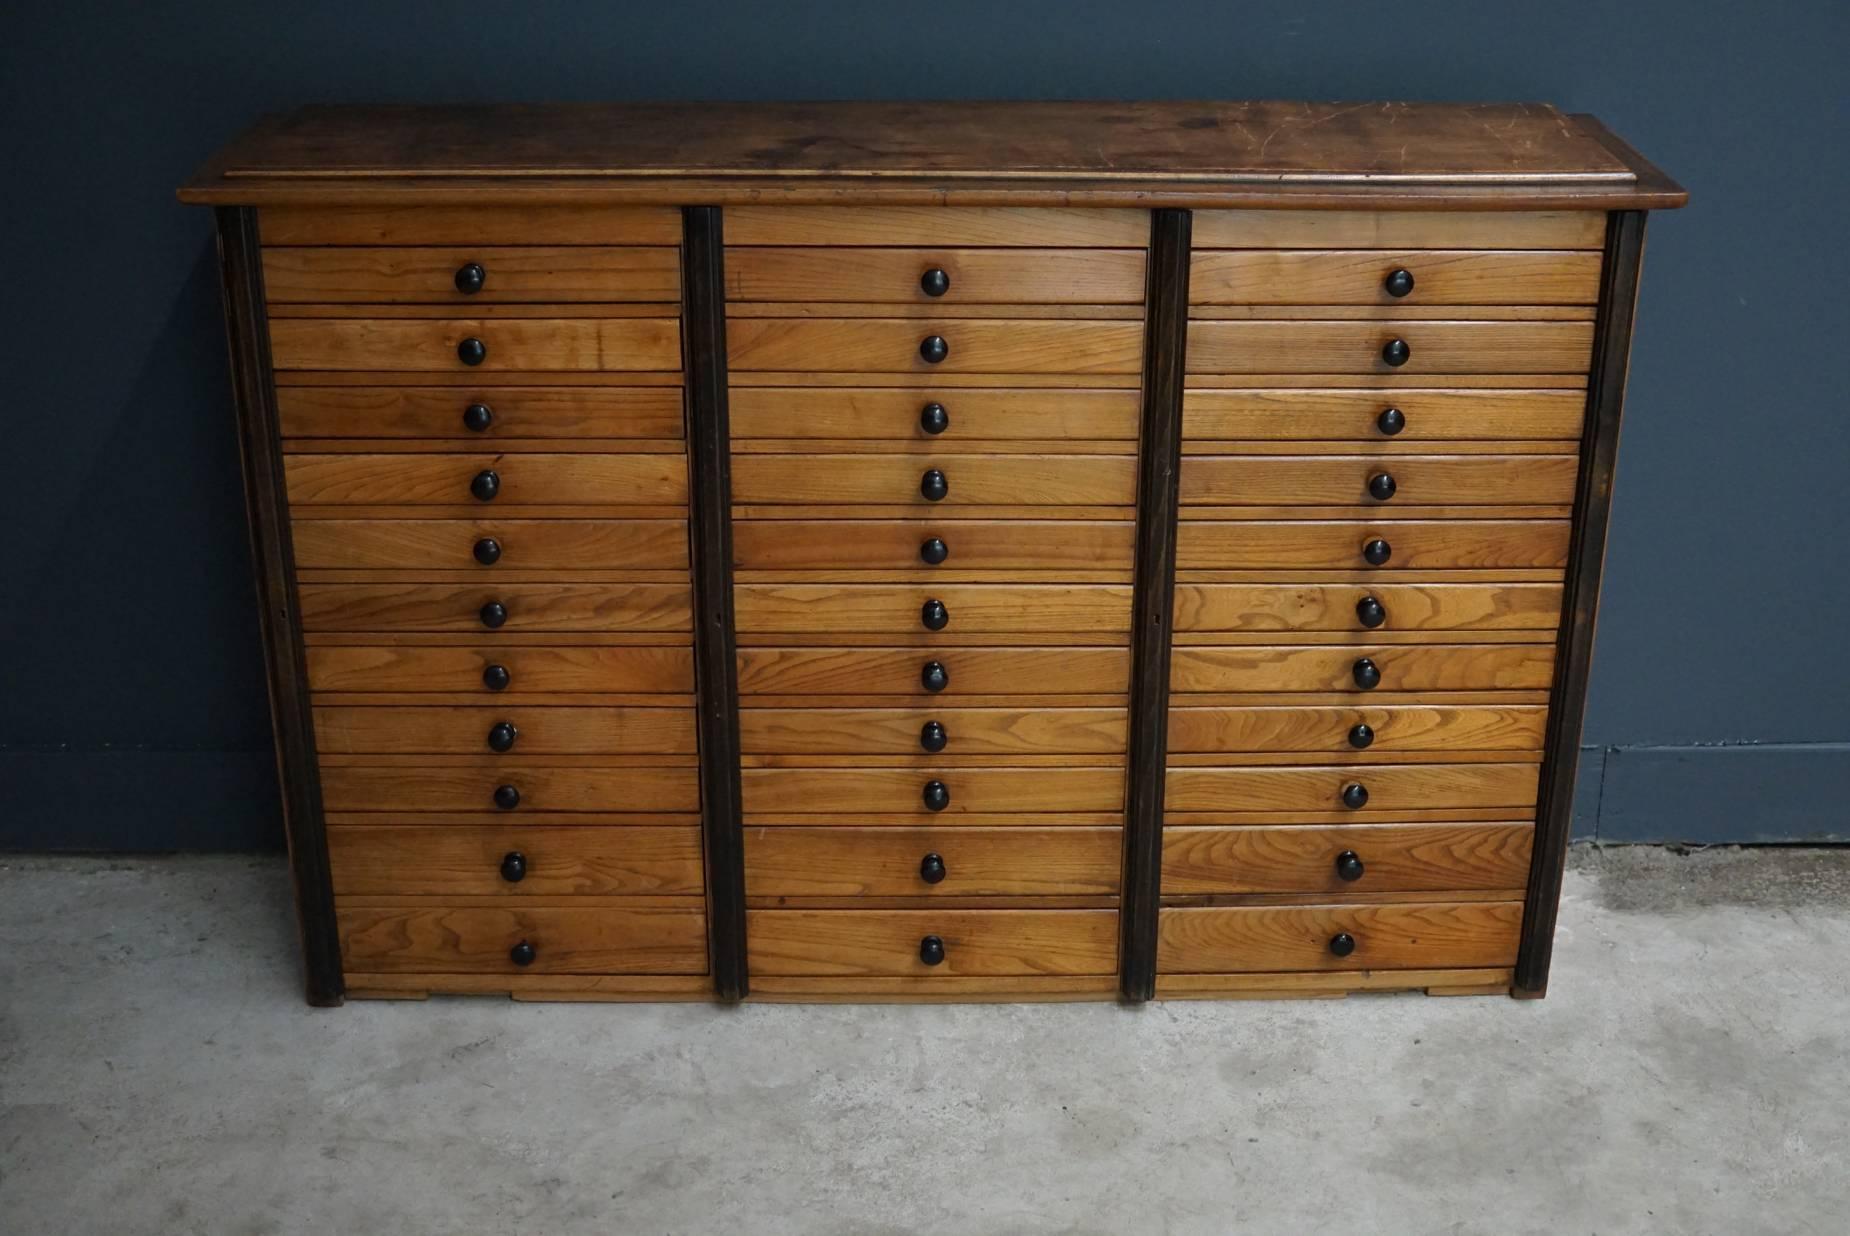 This apothecary cabinet was designed, circa 1950s in France. The cabinet is made from oak and features 33 drawers with black pulls. Most of the drawers have compartments and were used to store buttons.